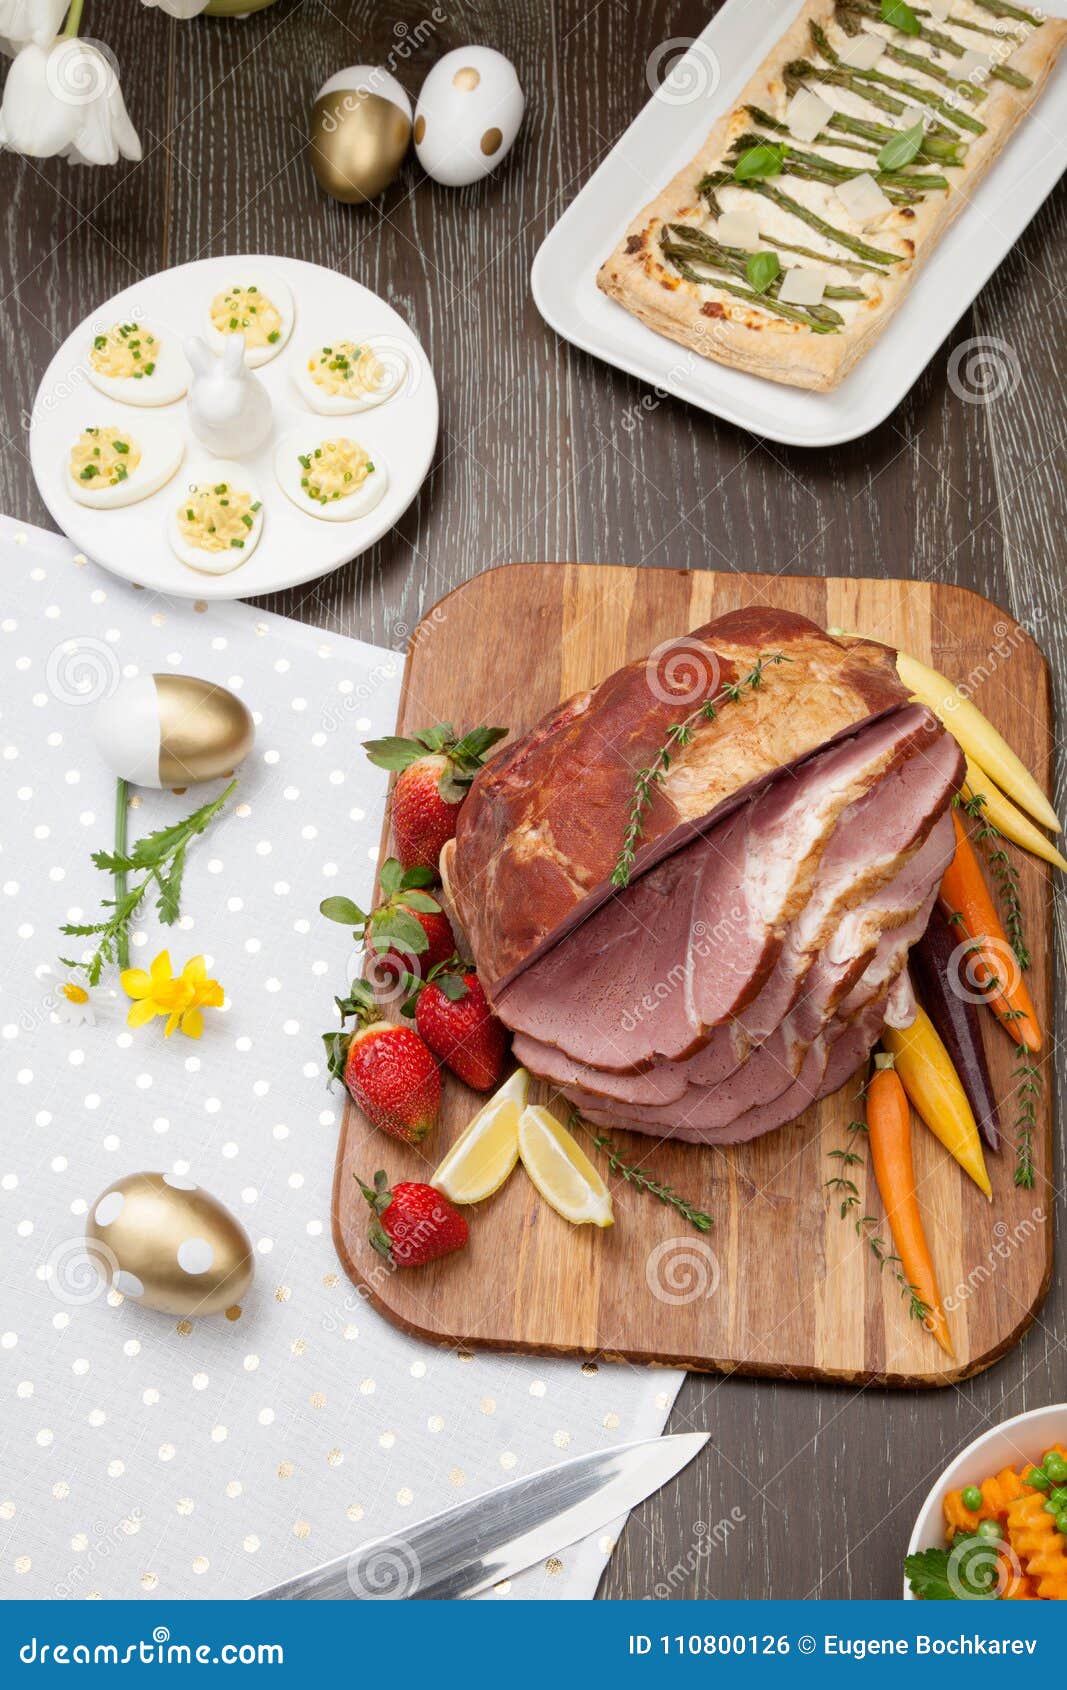 Spicey Ham For Easter. Delicious spicey roasted ham with deviled eggs, asparagus parmesan pastry, butternut squash with green peas, baby carrots, strawberries, and Easter decoration.